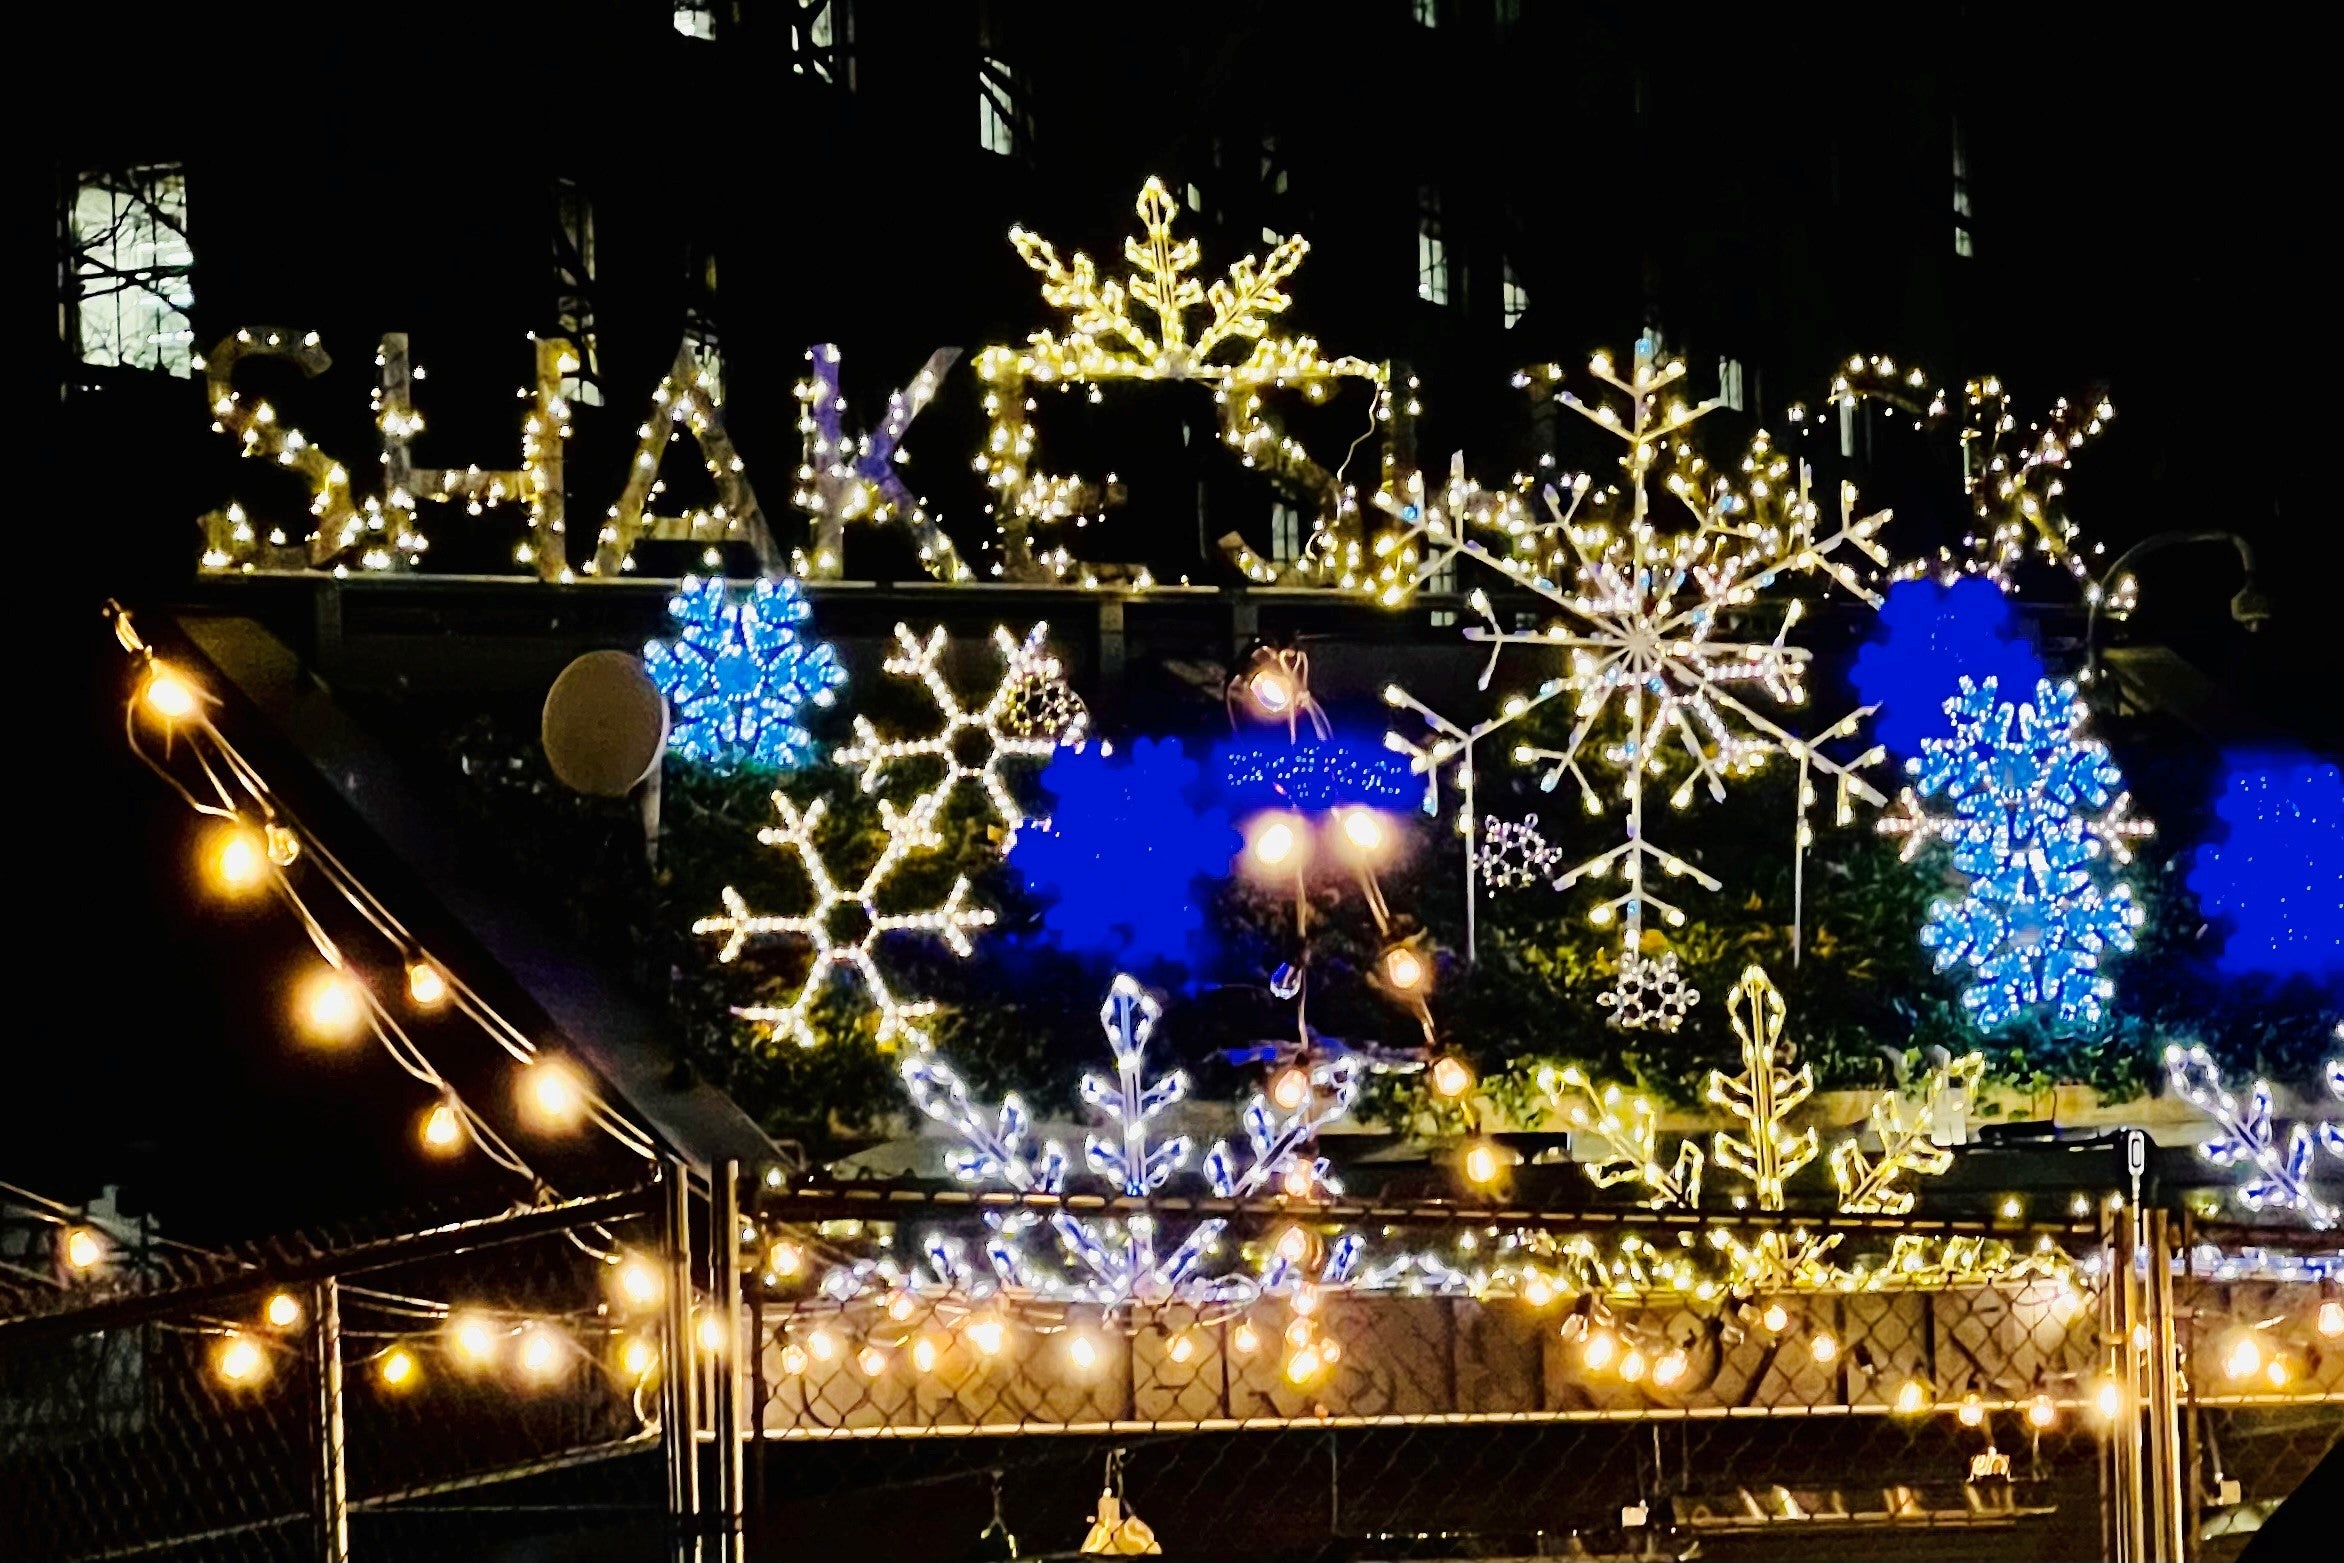 Shake Shack NYC Madison Square Park location decoration with Christmas lights, icicle lights and oversized snowflakes in warm white, cool white and blue